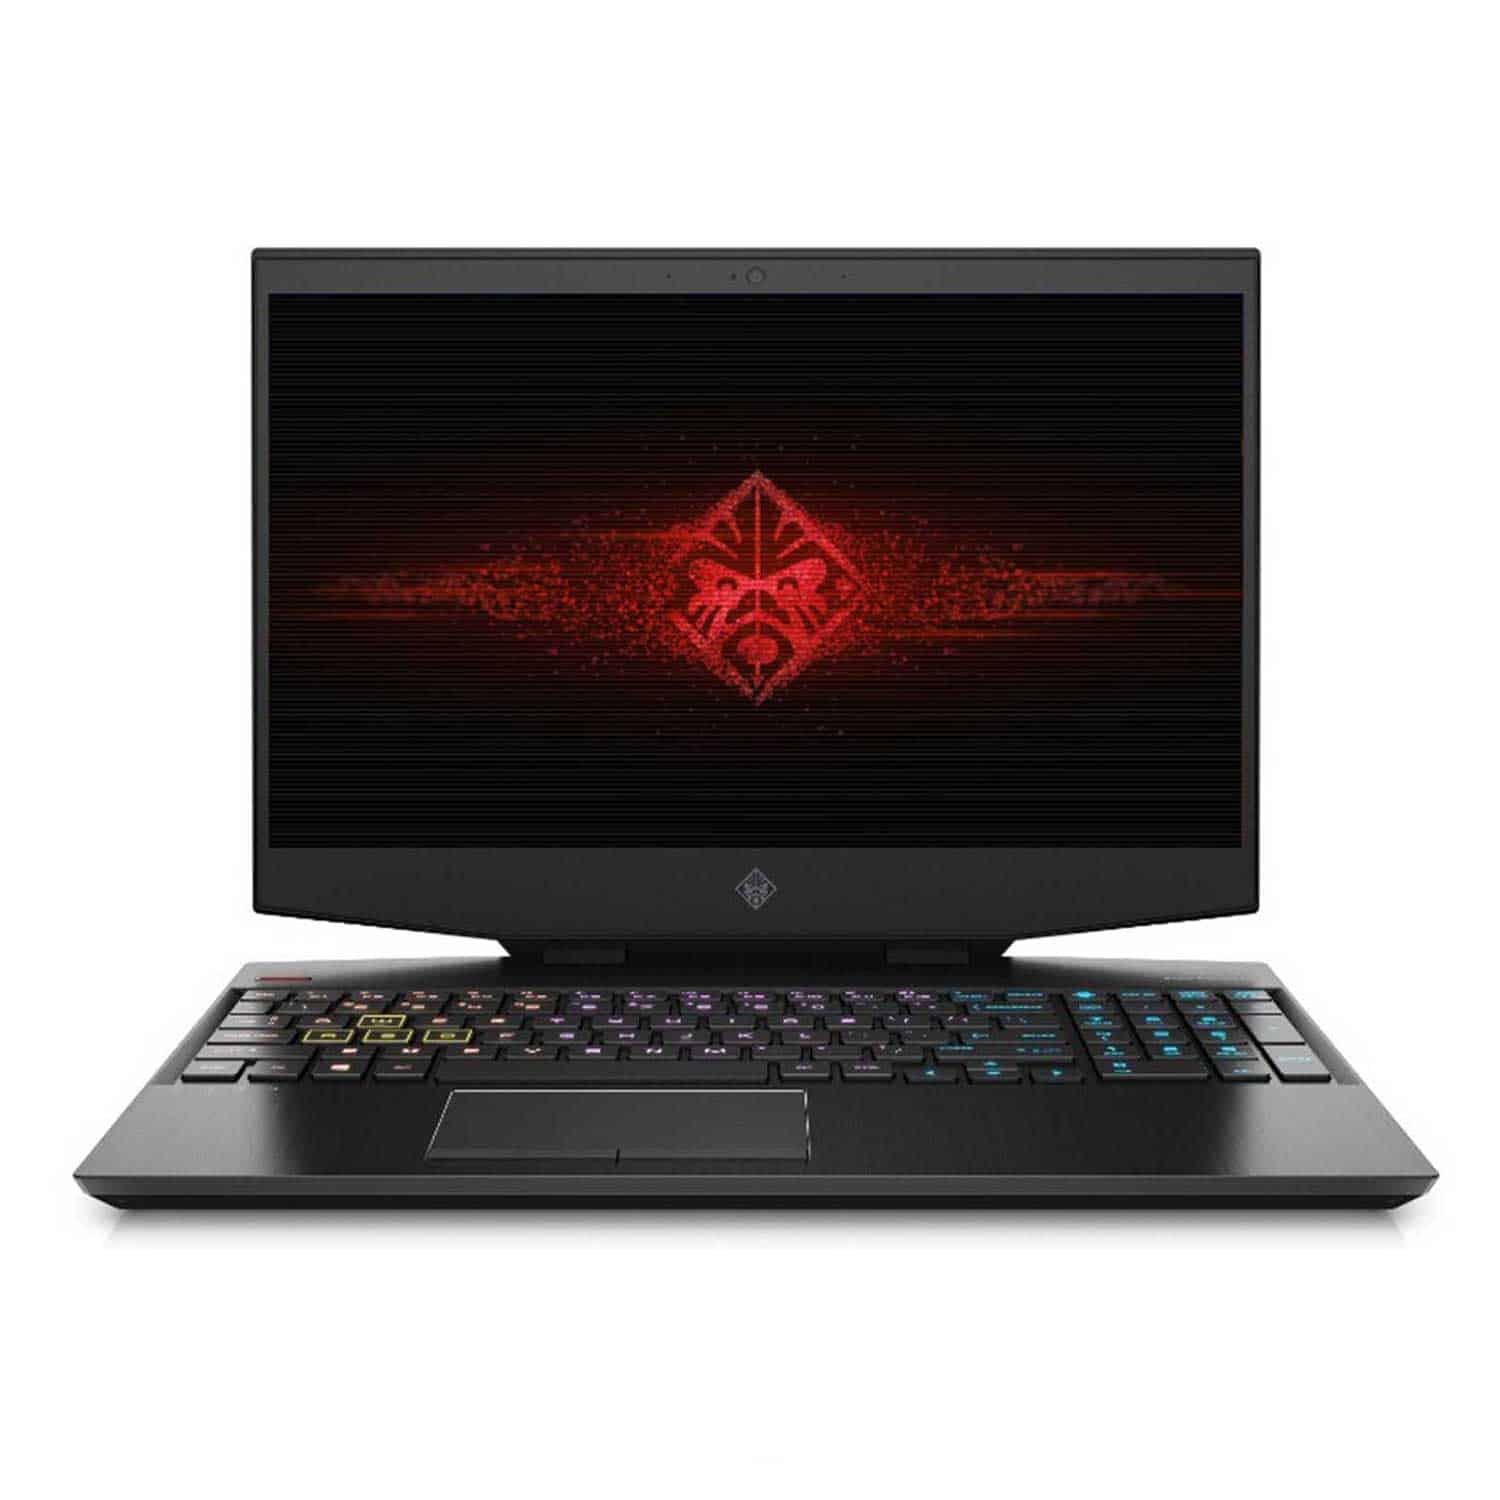 OMEN 15 Gaming Laptop With 15.6-Inch Display, Core i7 - 8th Gen Processor